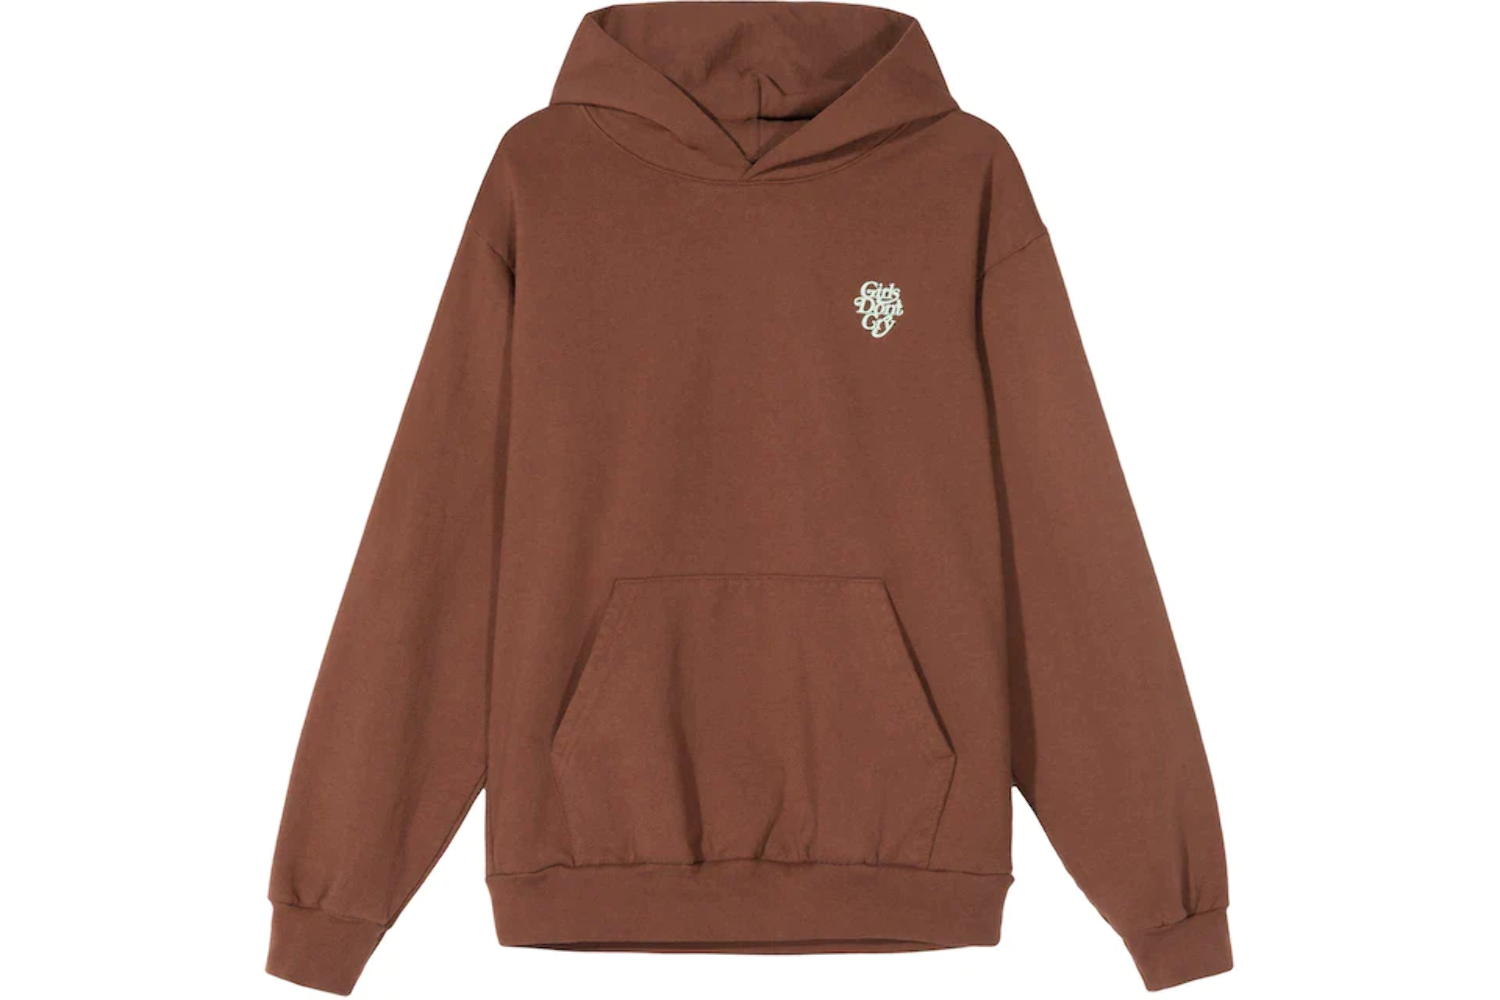 DS Girls Don’t Cry Brown Hoodie Sz S